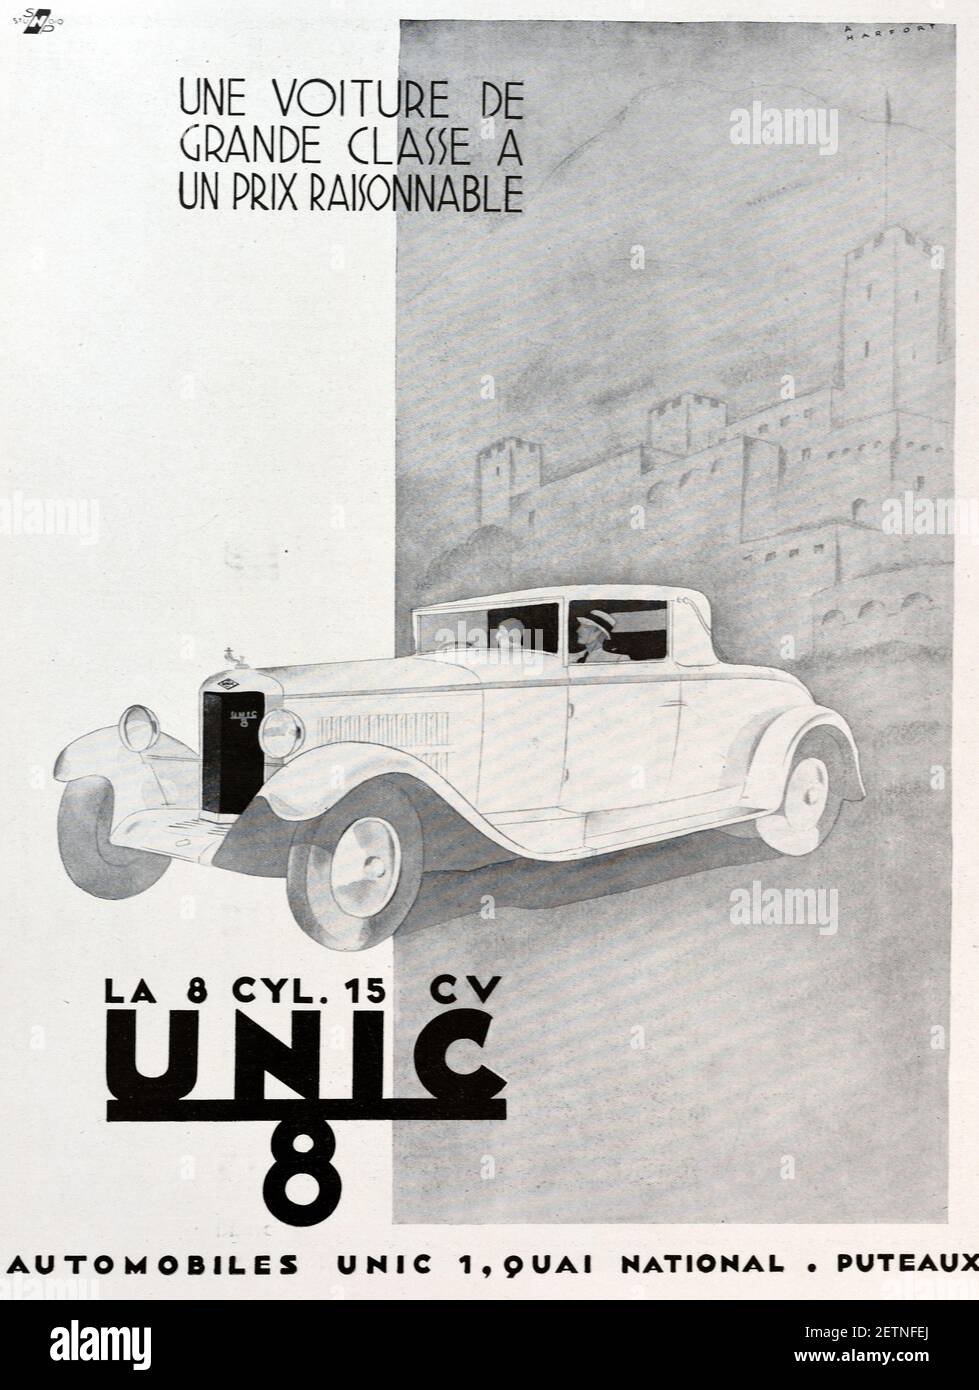 Vintage Advert, Advertisement or Publicity for a Vintage French Unic 8 Luxury Car or Automobile 1931 Stock Photo